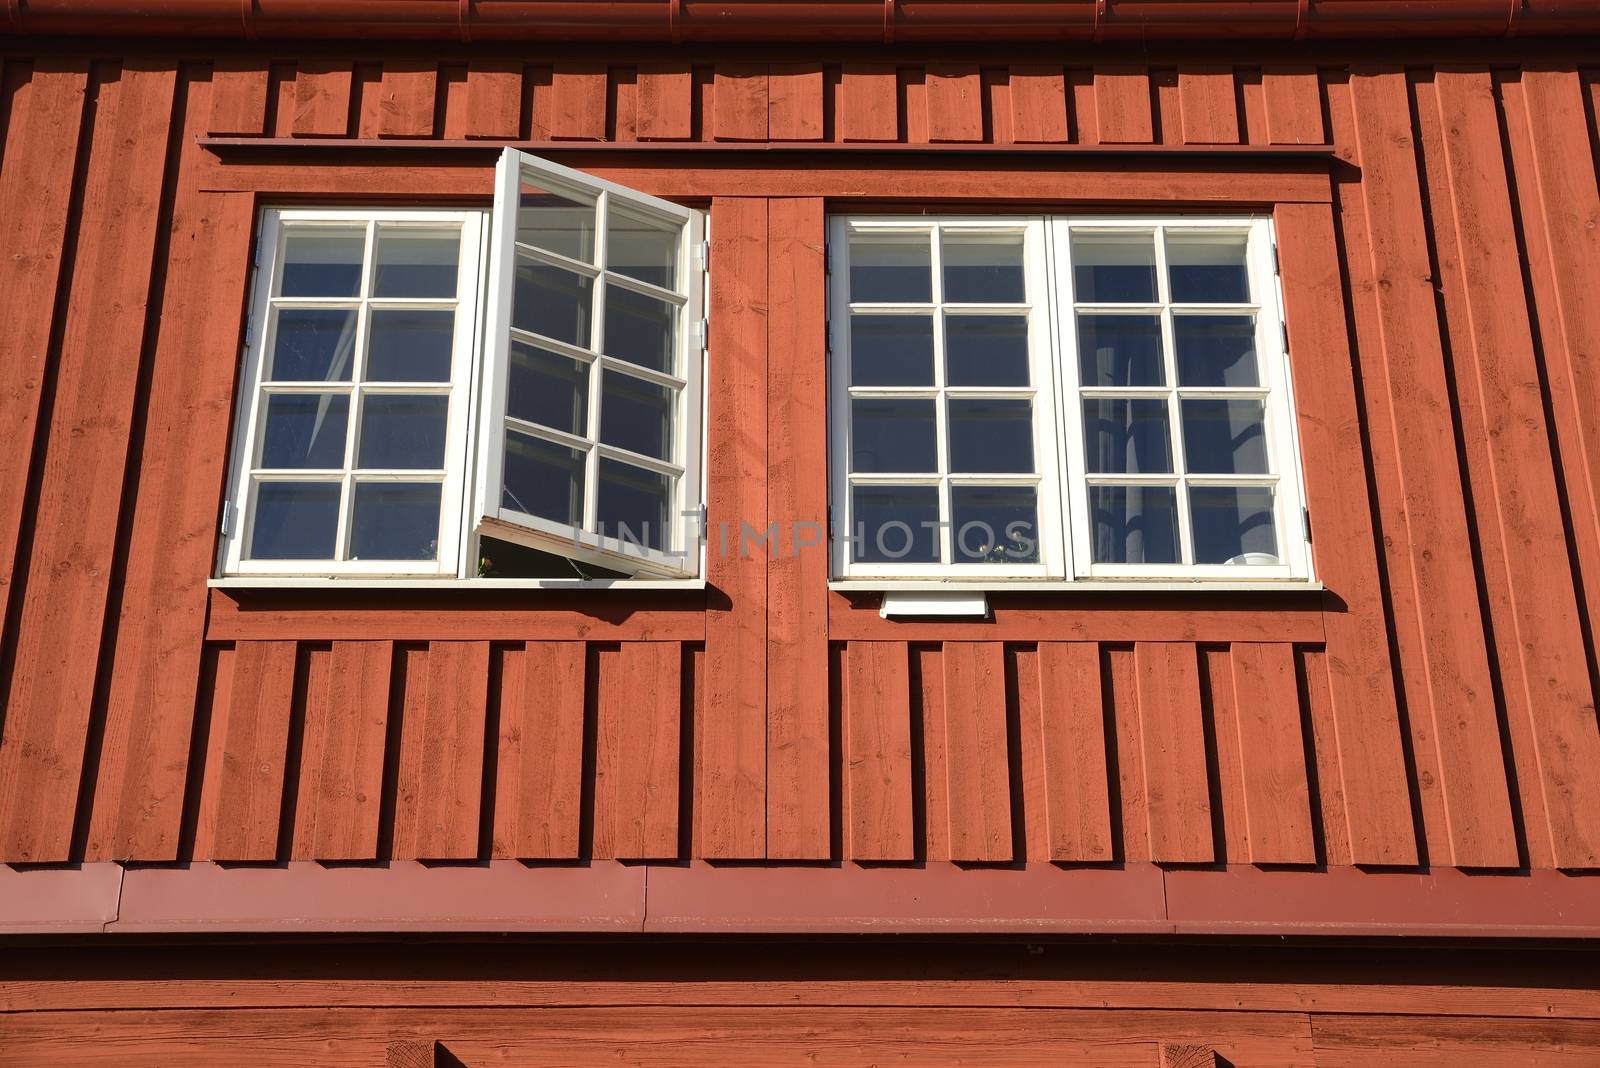 Traditional Swedish wooden facade by a40757